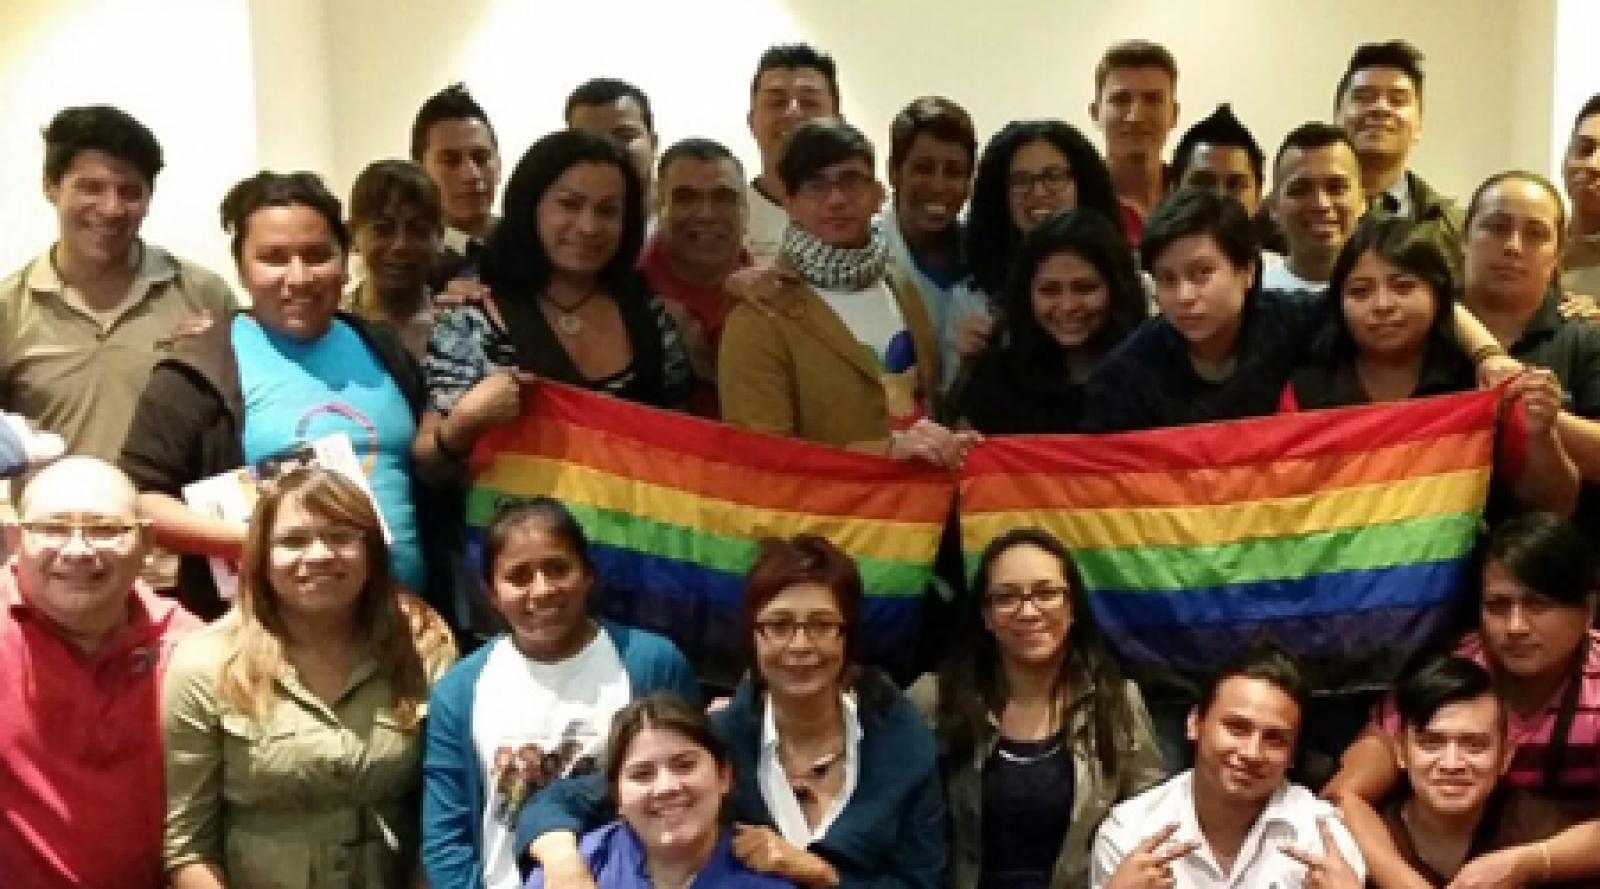 Advancing LGBTI Inclusion in Guatemala: “They need to know who we are and that we matter.”